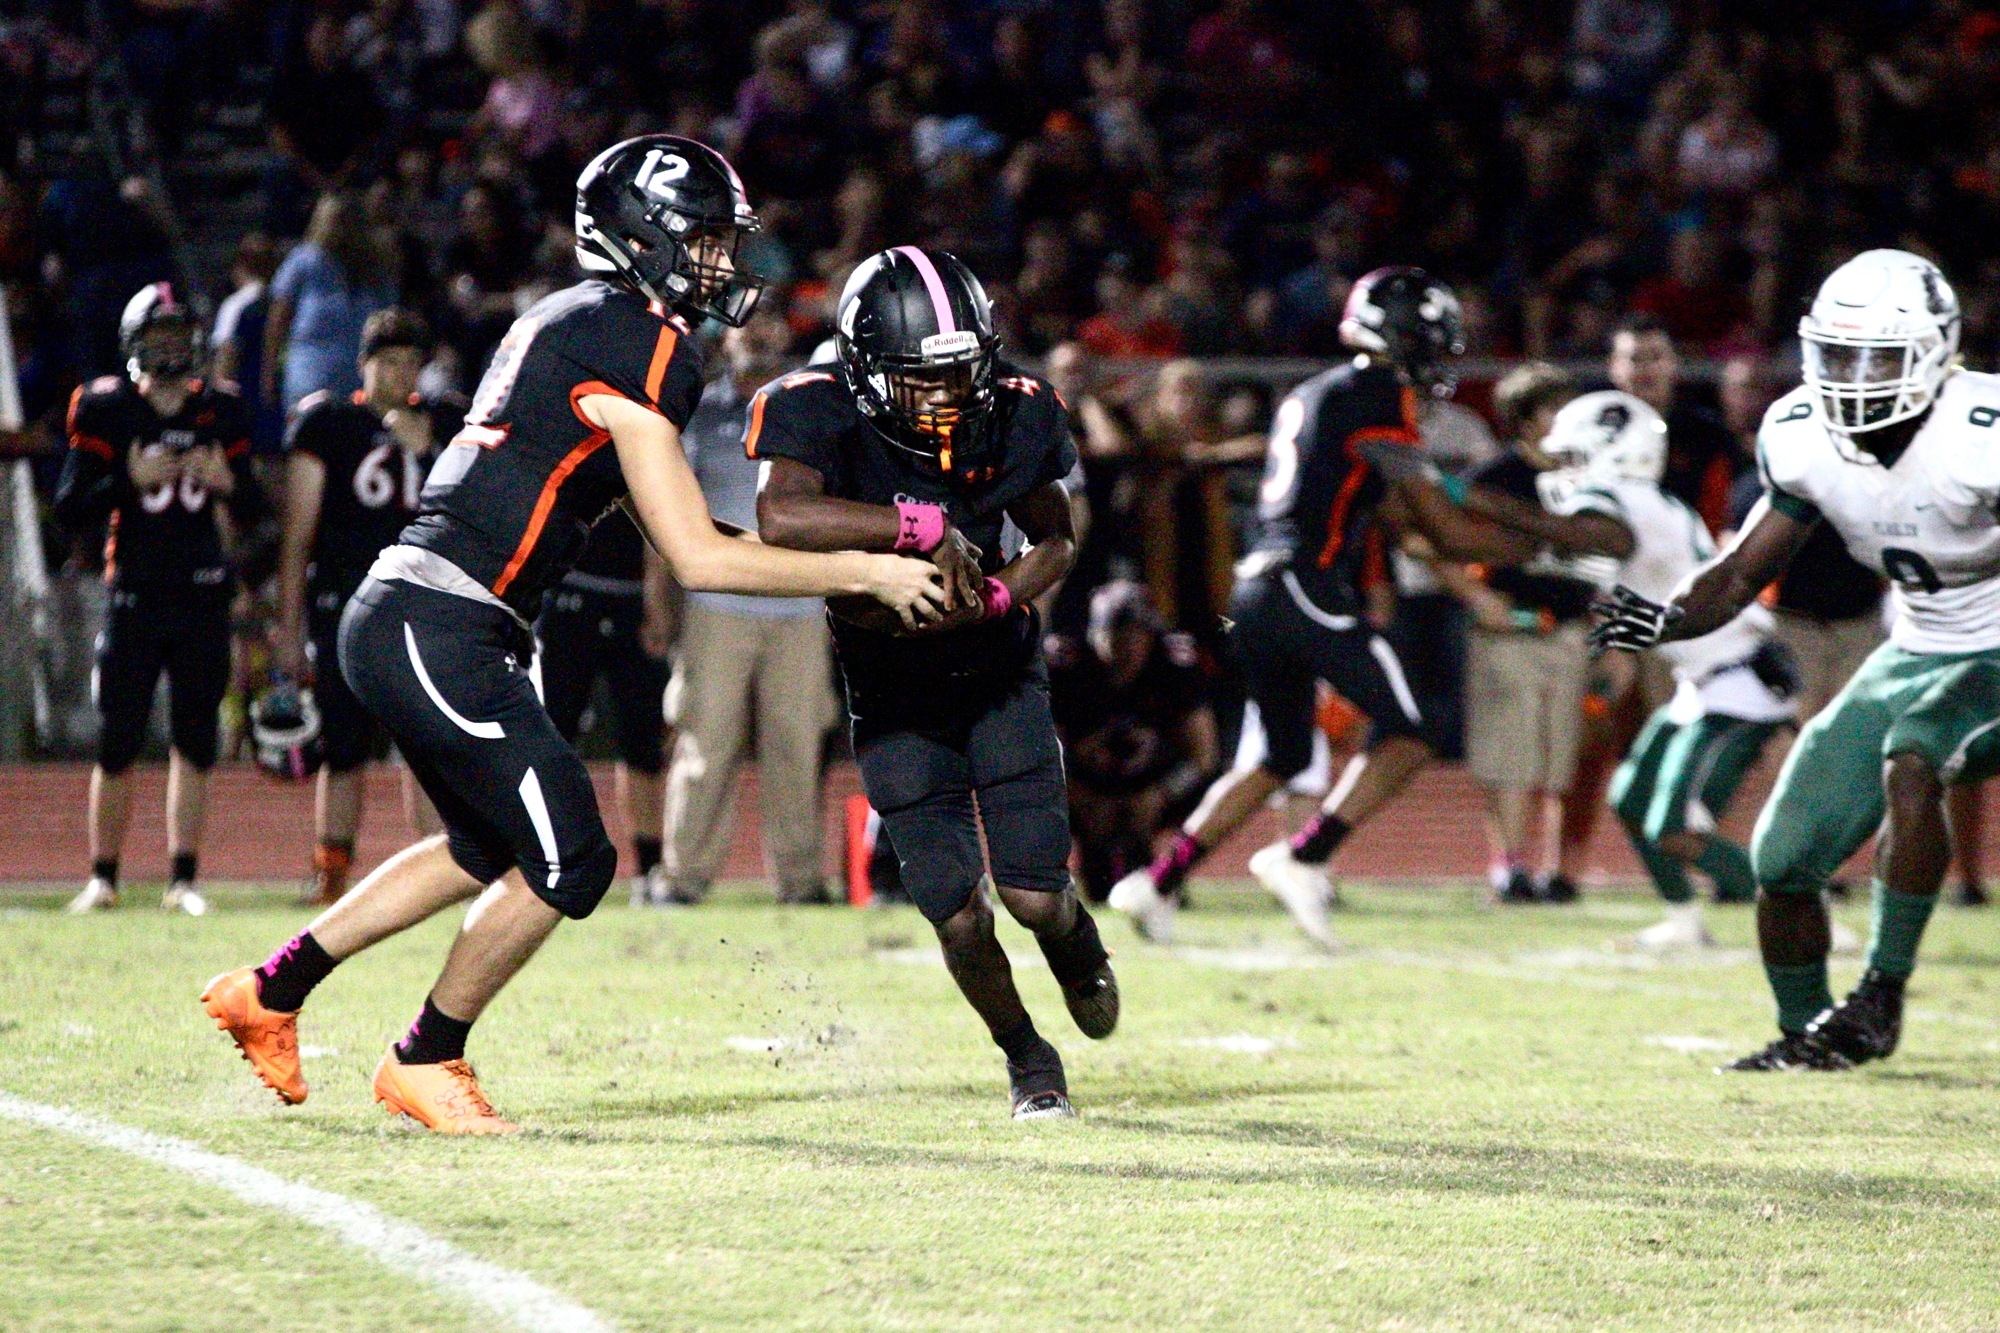 Spruce Creek running back Jacquez Lord takes a hand-off from Hawks quarterback Kyle Minckler in a game against Flagler Palm Coast on Friday, Oct. 13. Photo by Ray Boone